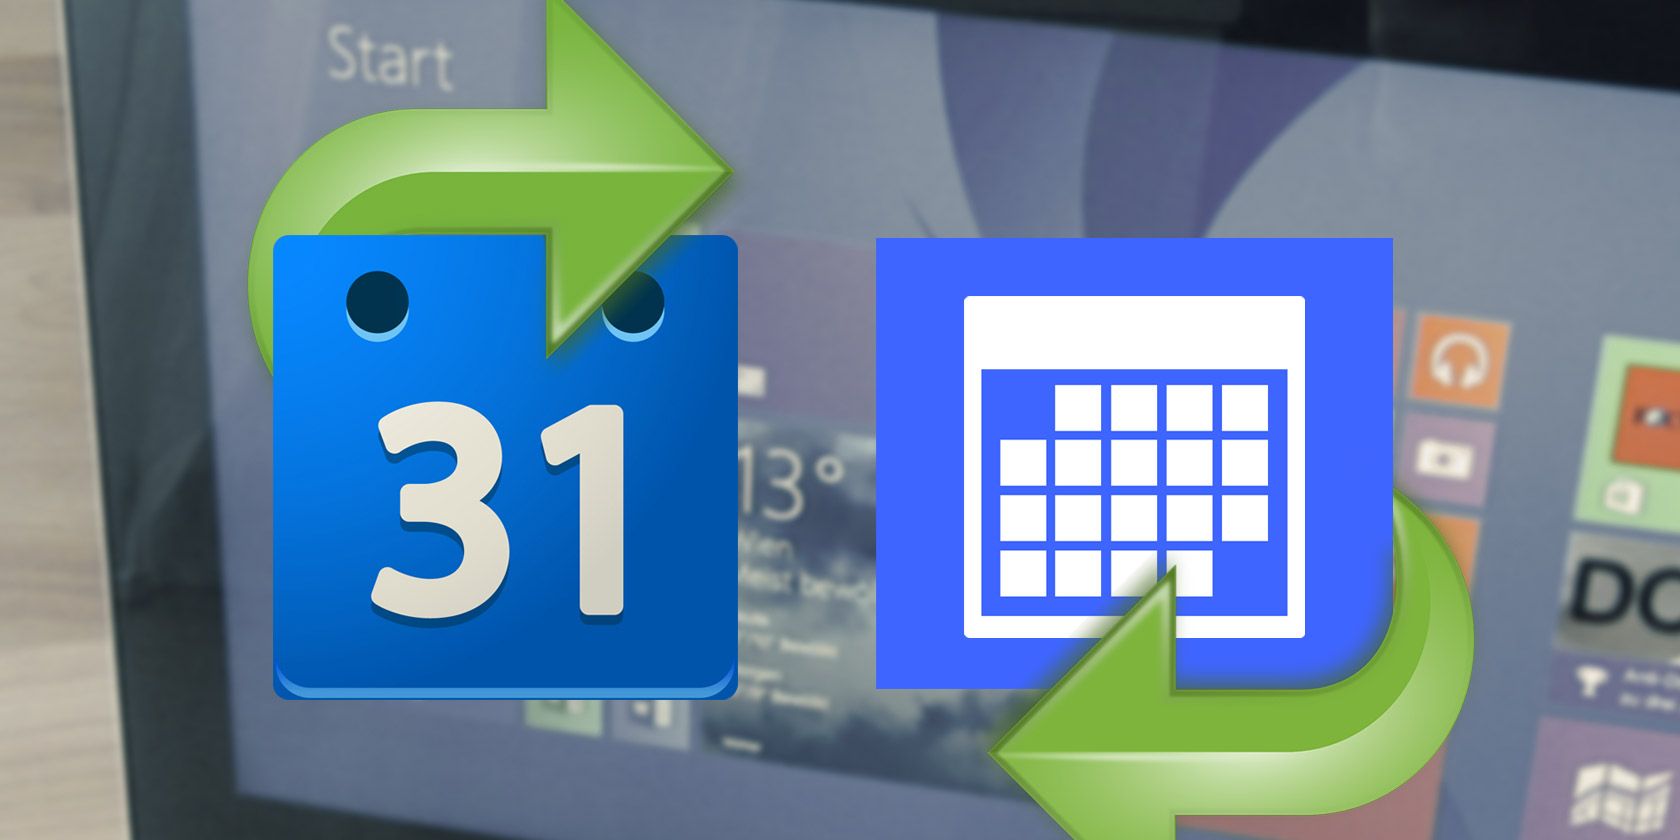 How to Sync Your Google Calendar Appointments With Windows 8